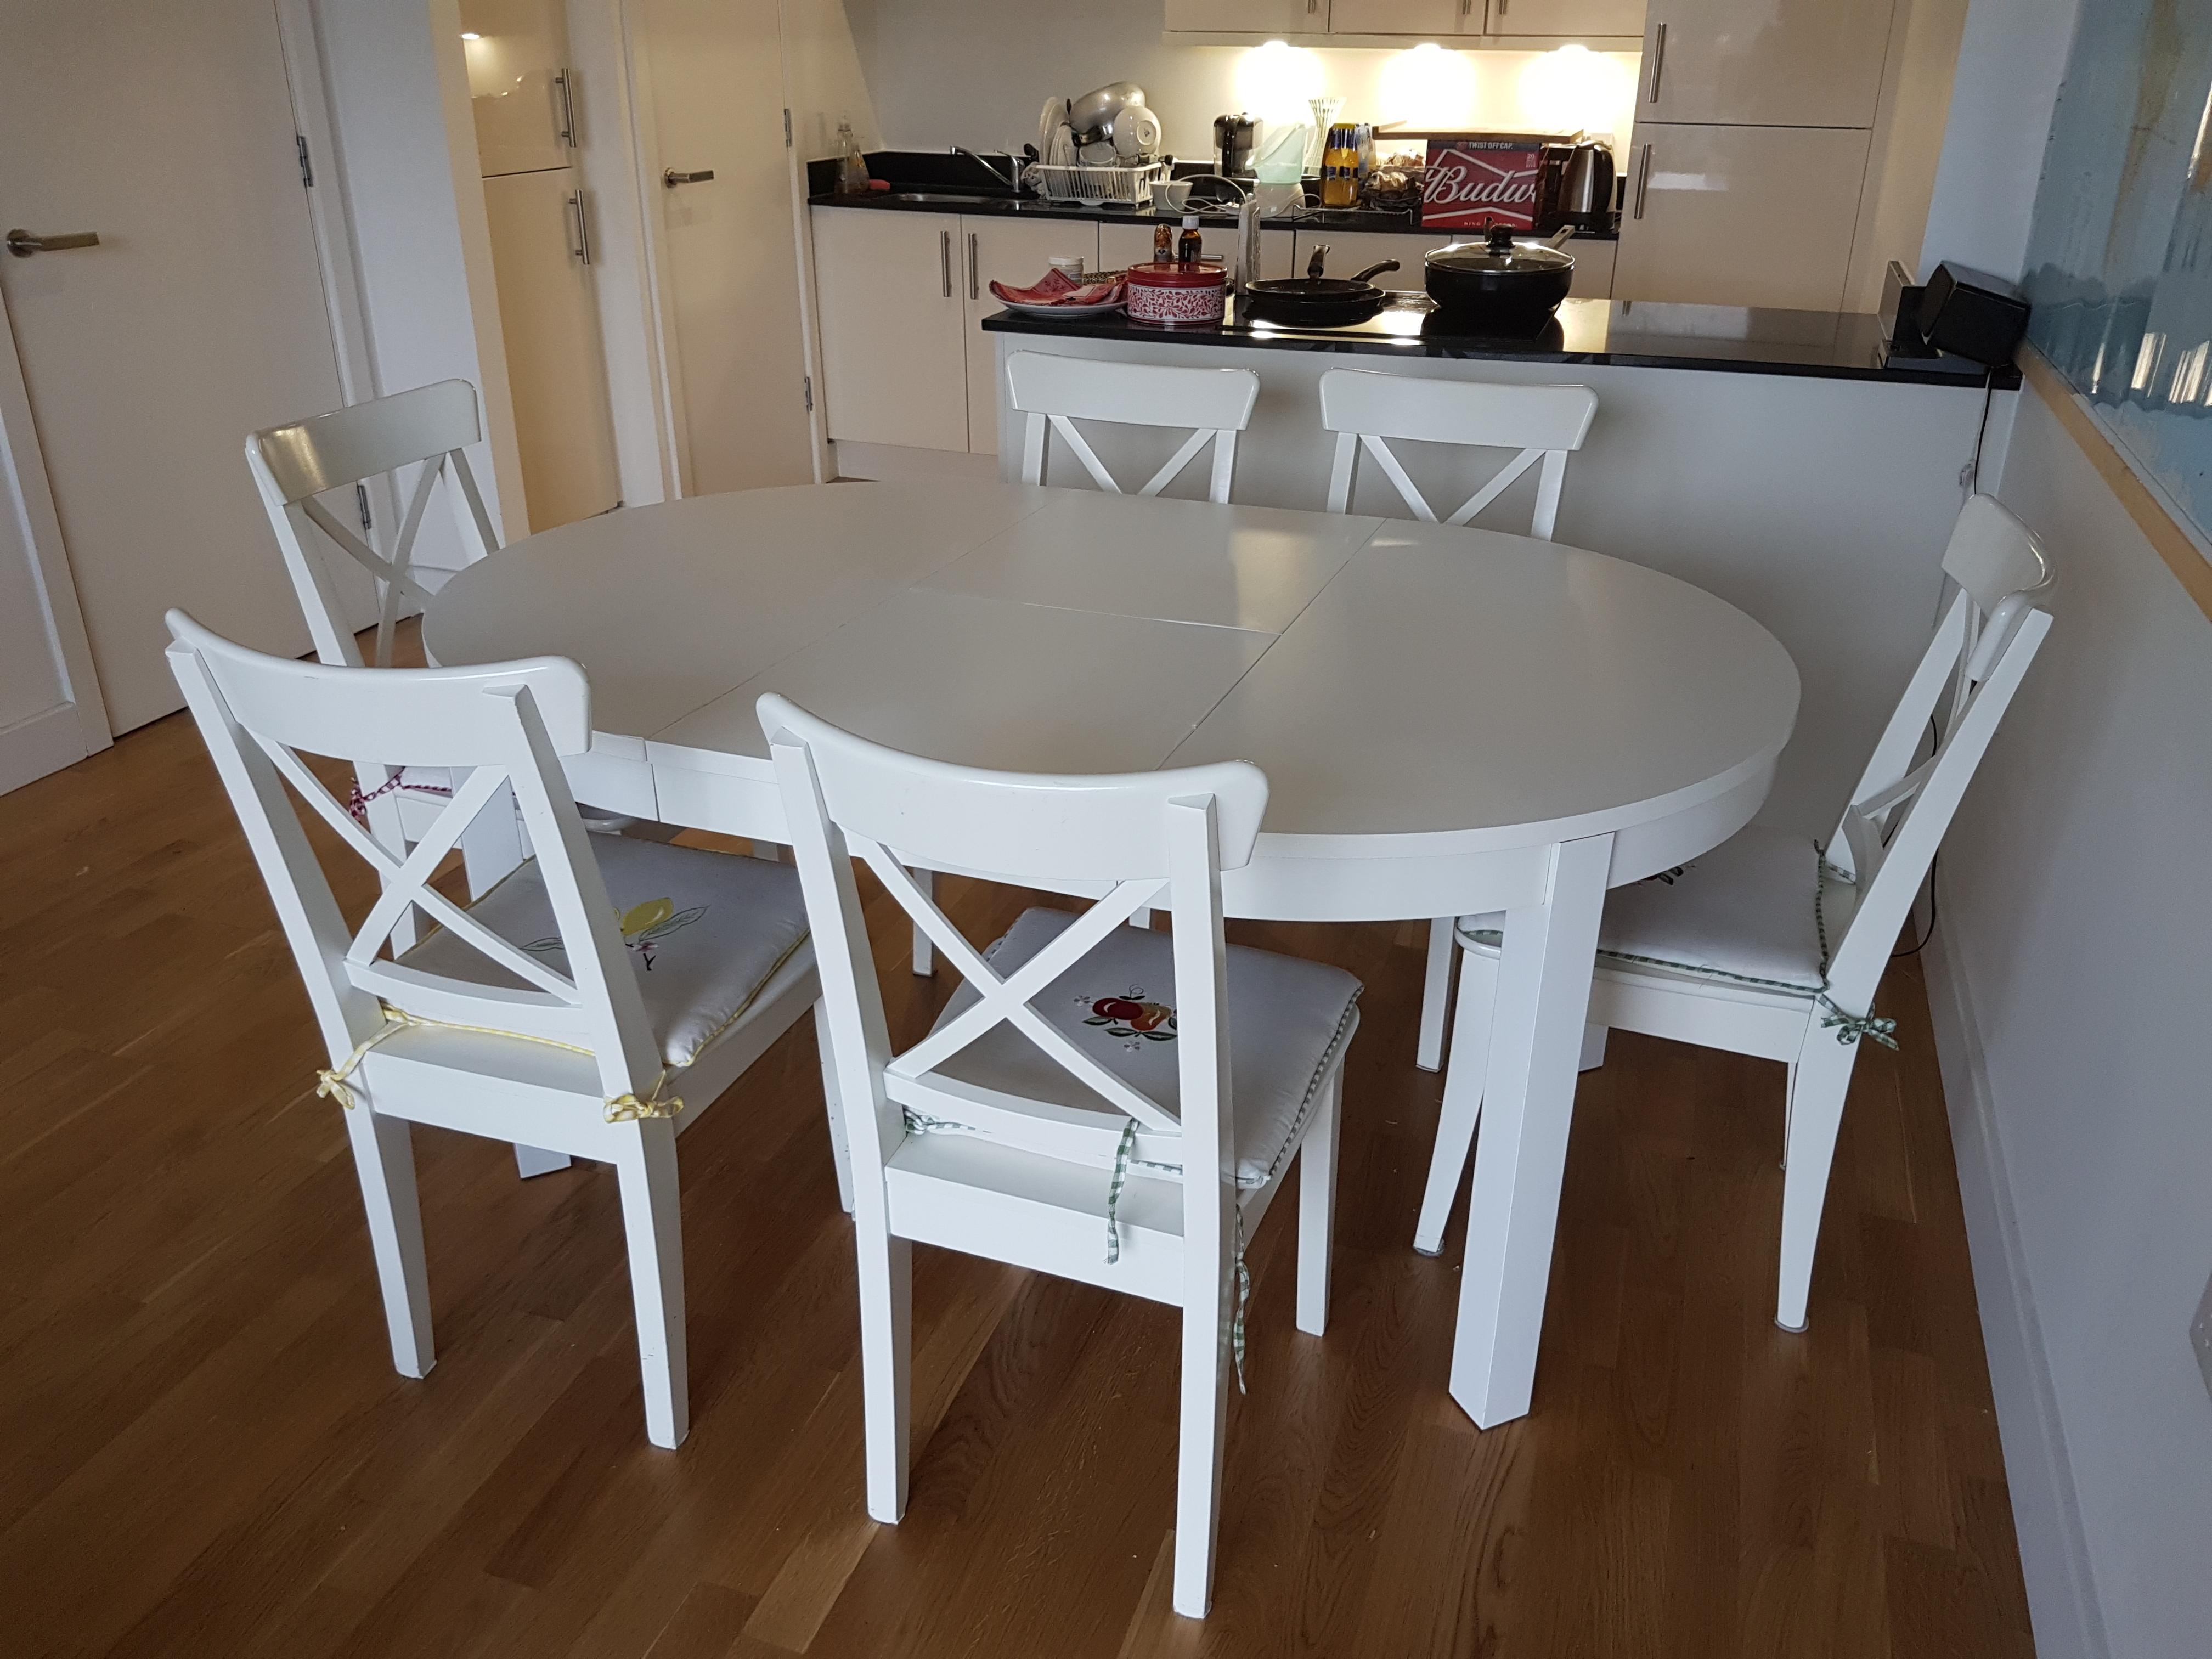 Extendable Dining Table Round Ikea, Round Extending Table Ikea